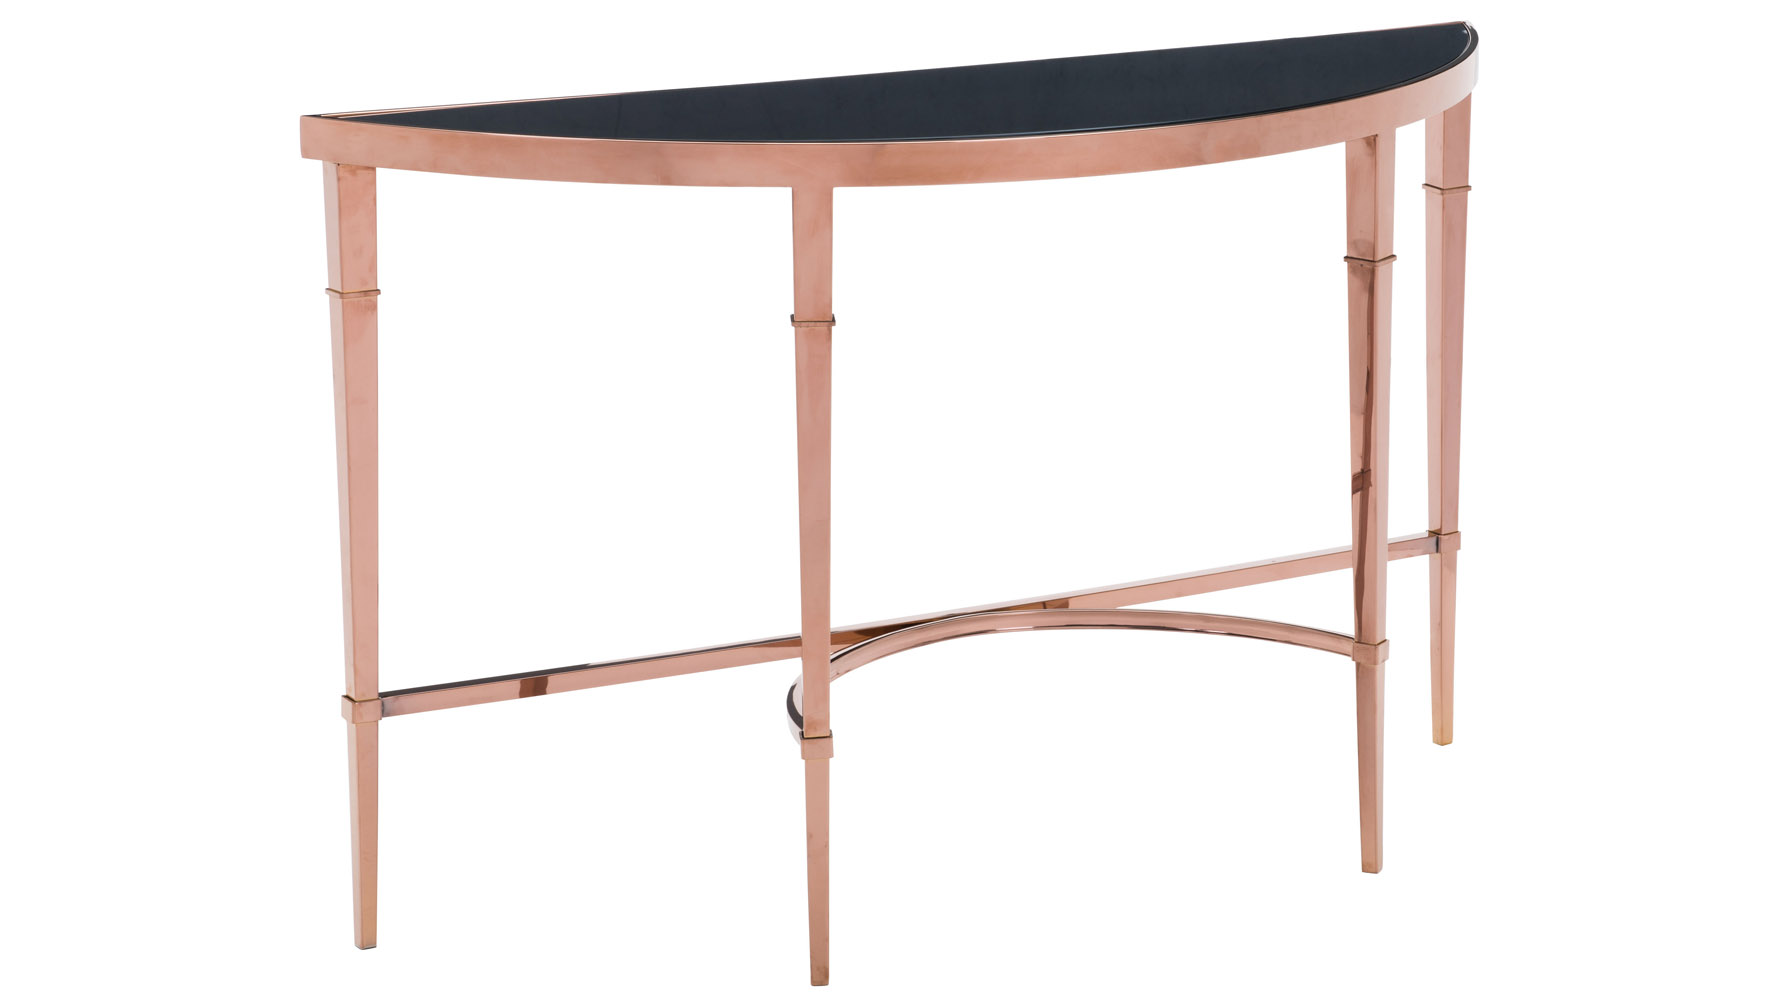 modern console tables side coffee furniture pascale glass table rose gold and black zuri inch high accent outdoor cement benches living room packages west elm free shipping code